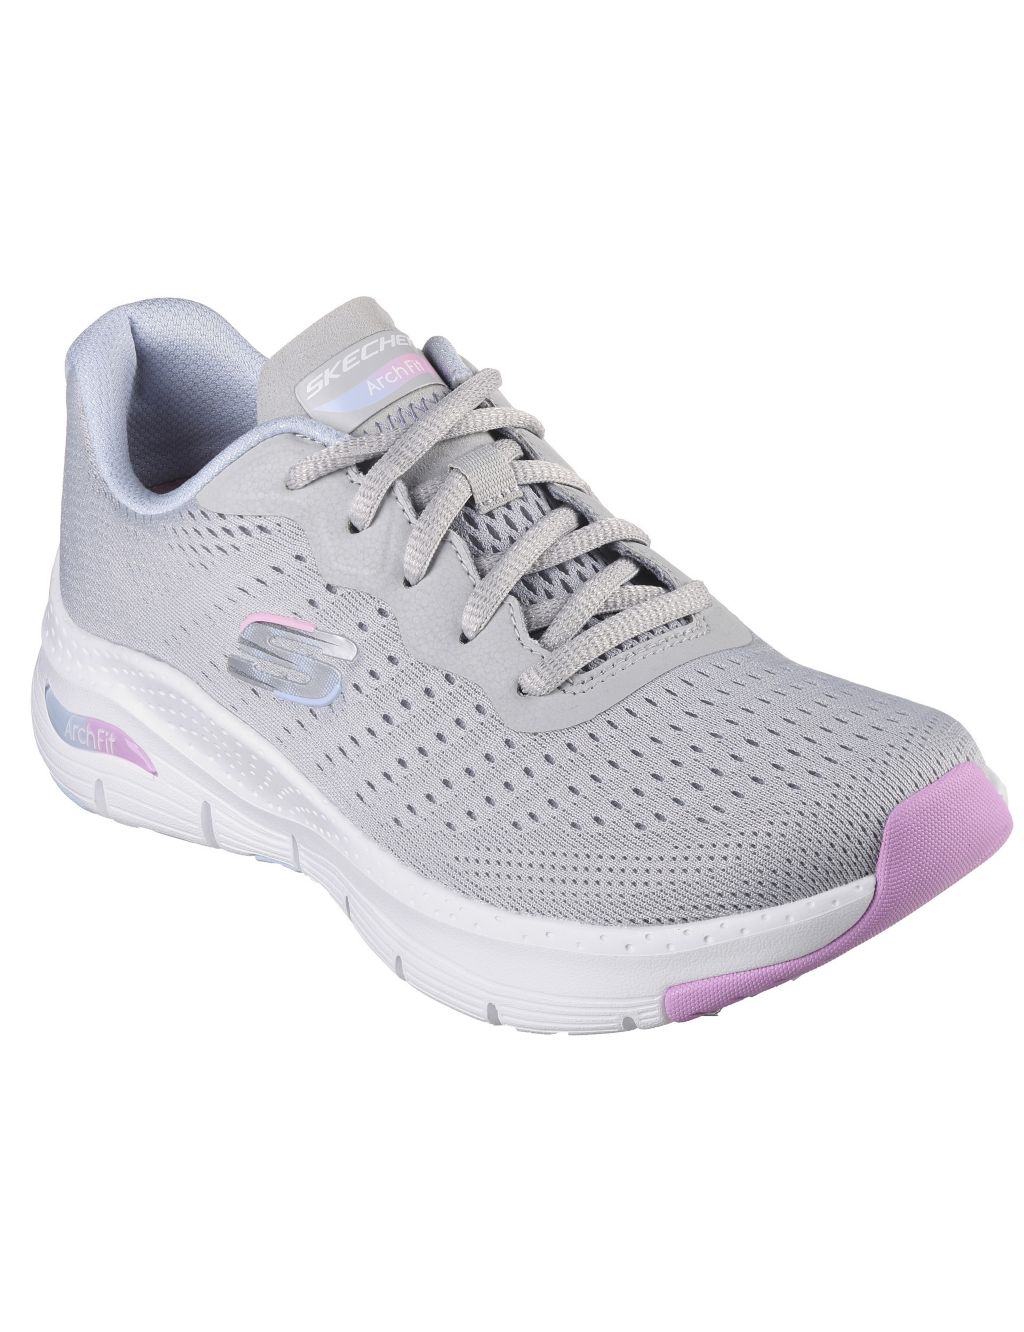 Arch Fit™ Infinity Lace Up Mesh Trainers image 2